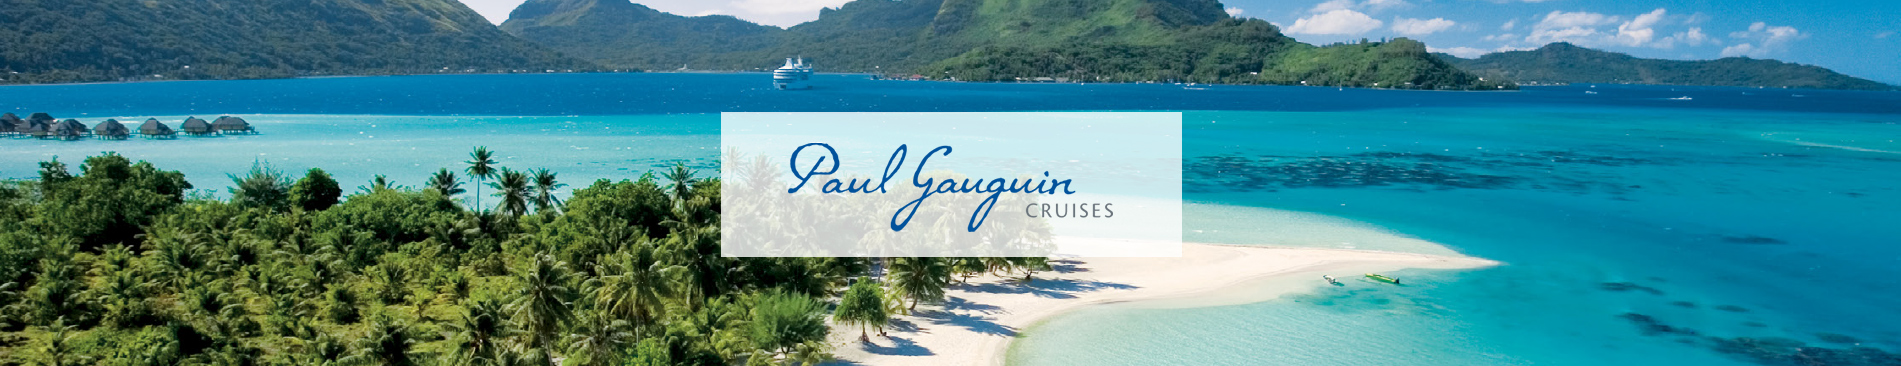 CruiseAlong is your Paul Gauguin cruise specialist